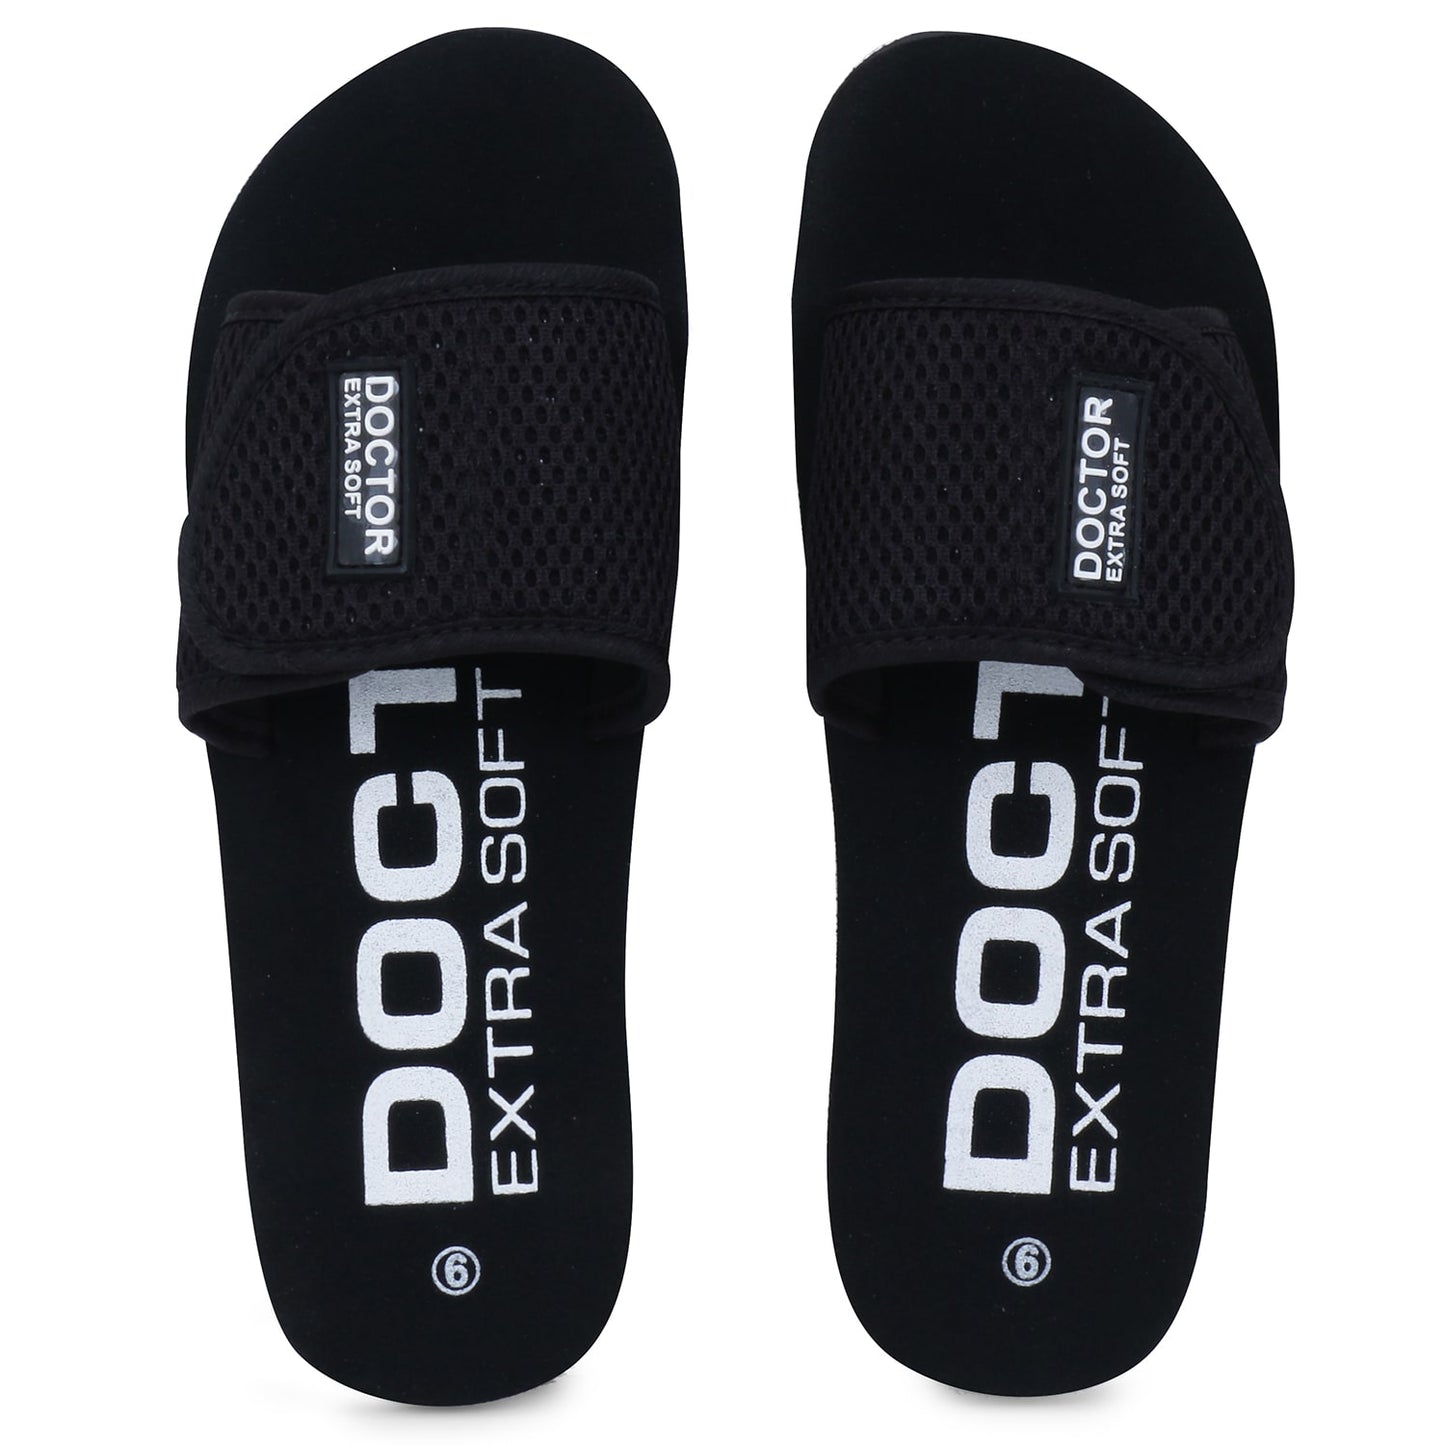 DOCTOR EXTRA SOFT Women's Slippers/Flip-flops D-17 For Ankle & Heel Pain Relief